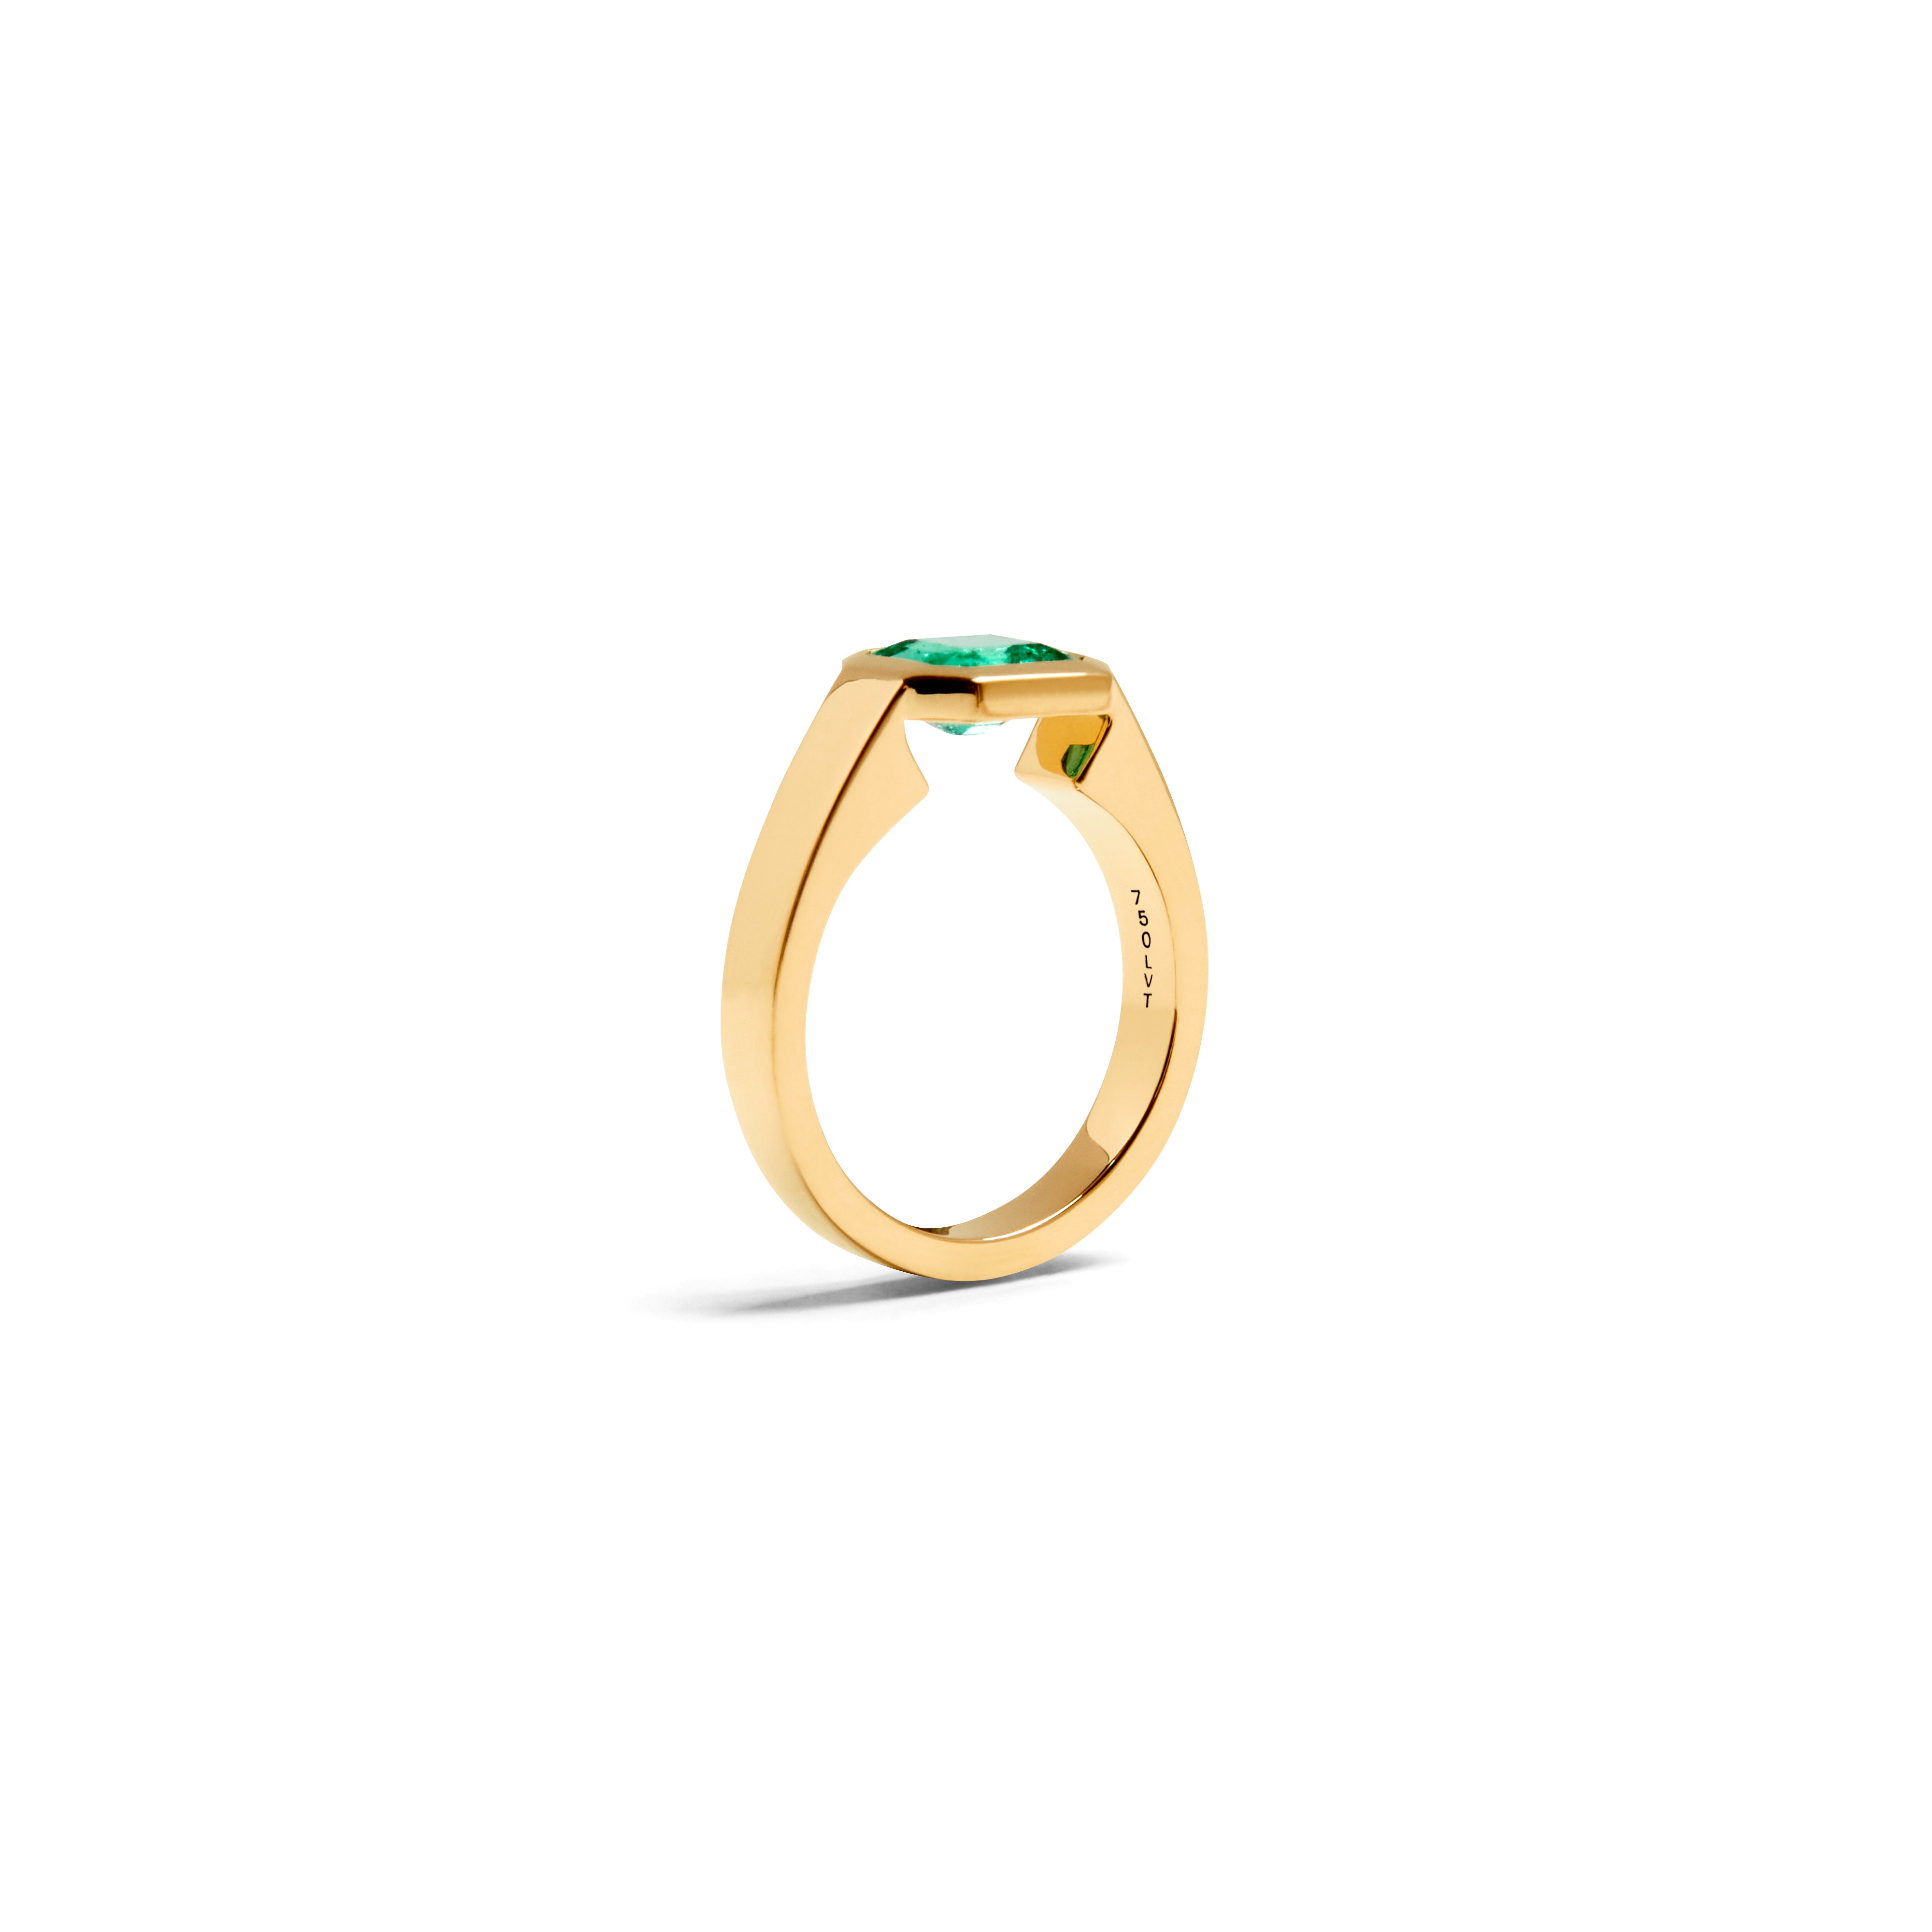 COCKTAIL SIGNET EMERALD RING